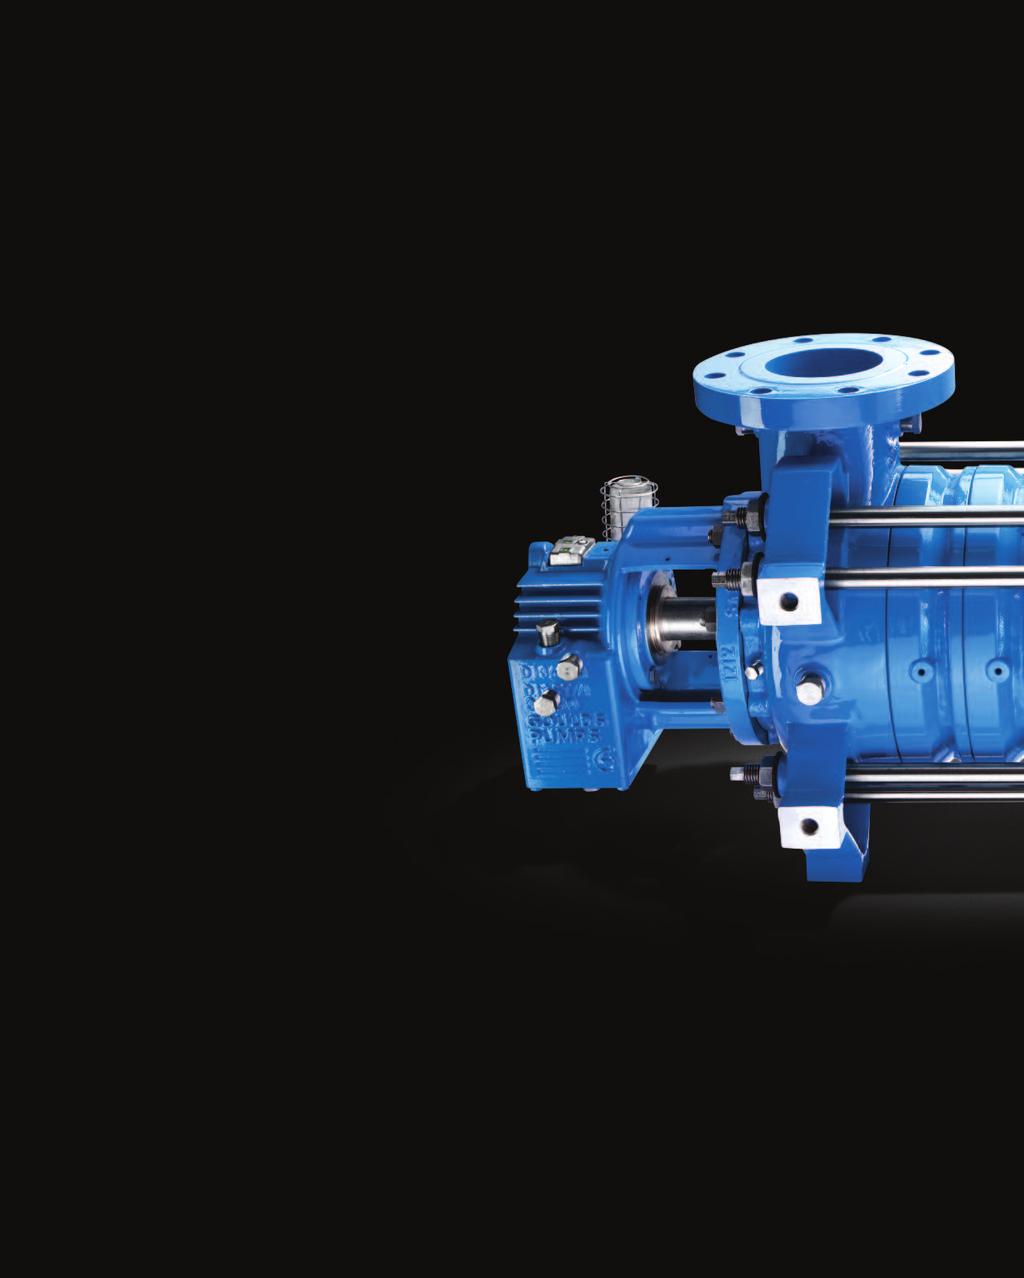 Lower TCO for demanding, high-pressure applications. Everything about the new ITT Goulds 3393 multistage ring section pump is designed to minimize your total cost of ownership.